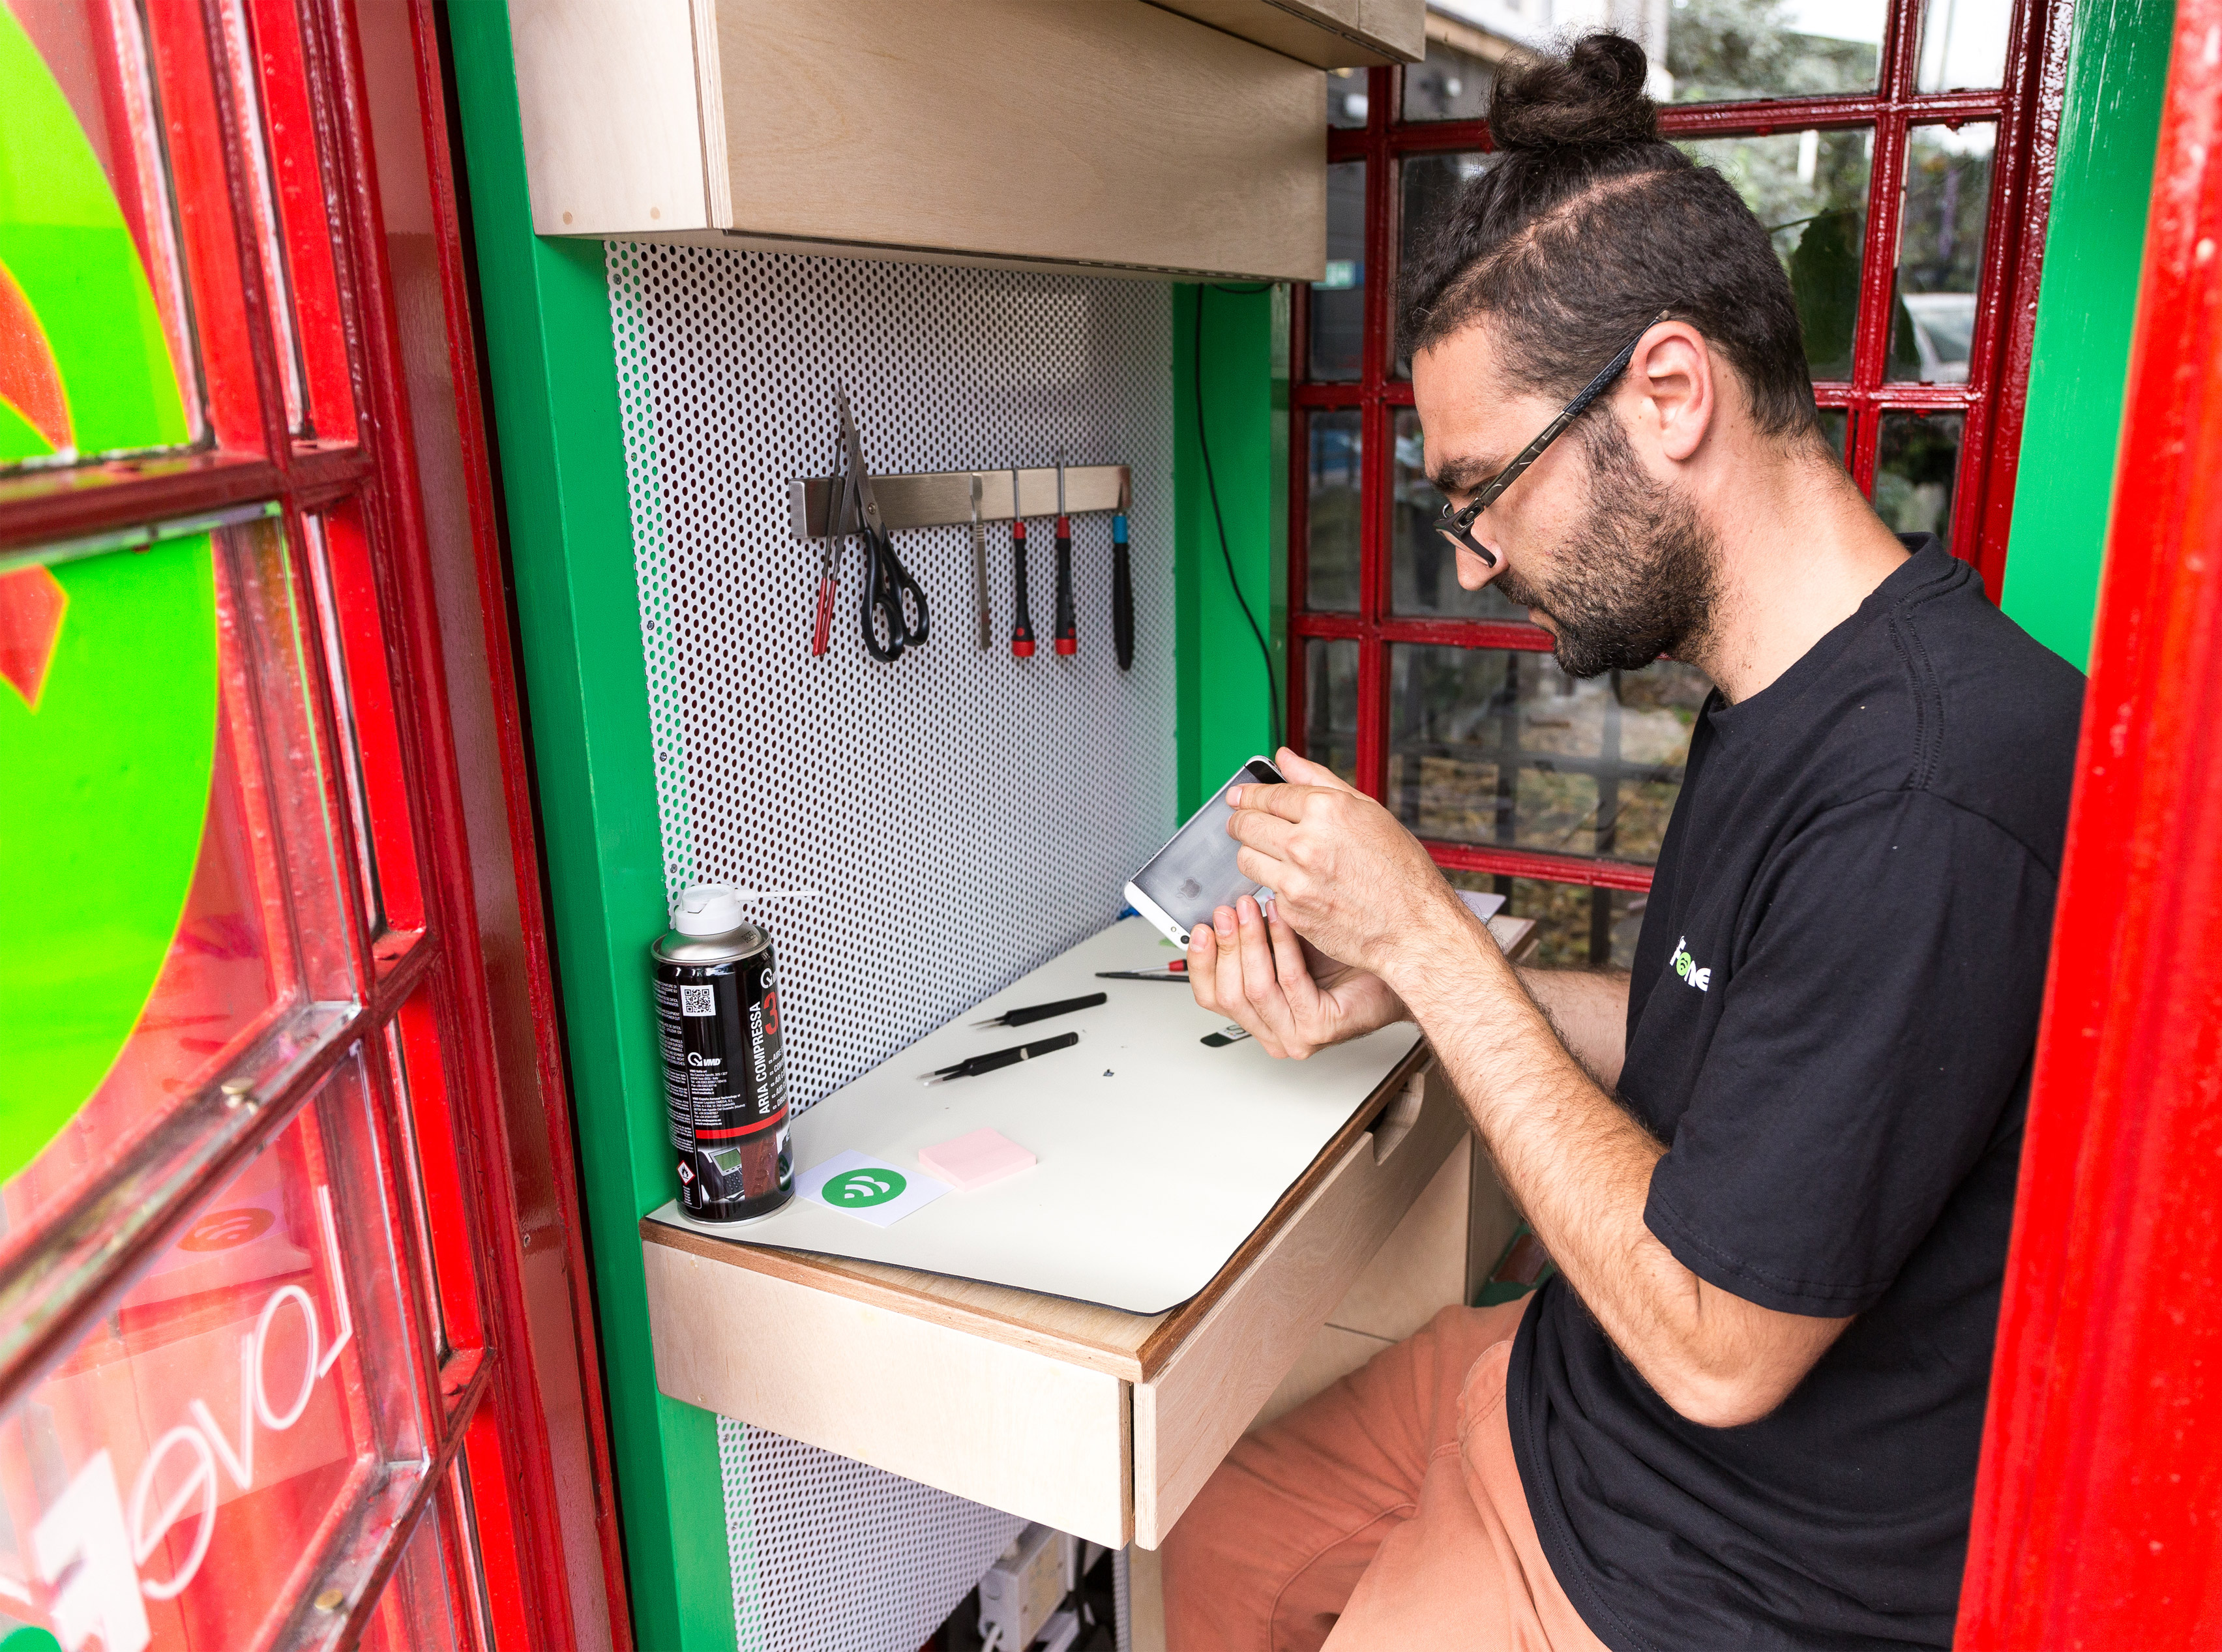 Lovefone turns UK's disused phone booths into tiny repair shops